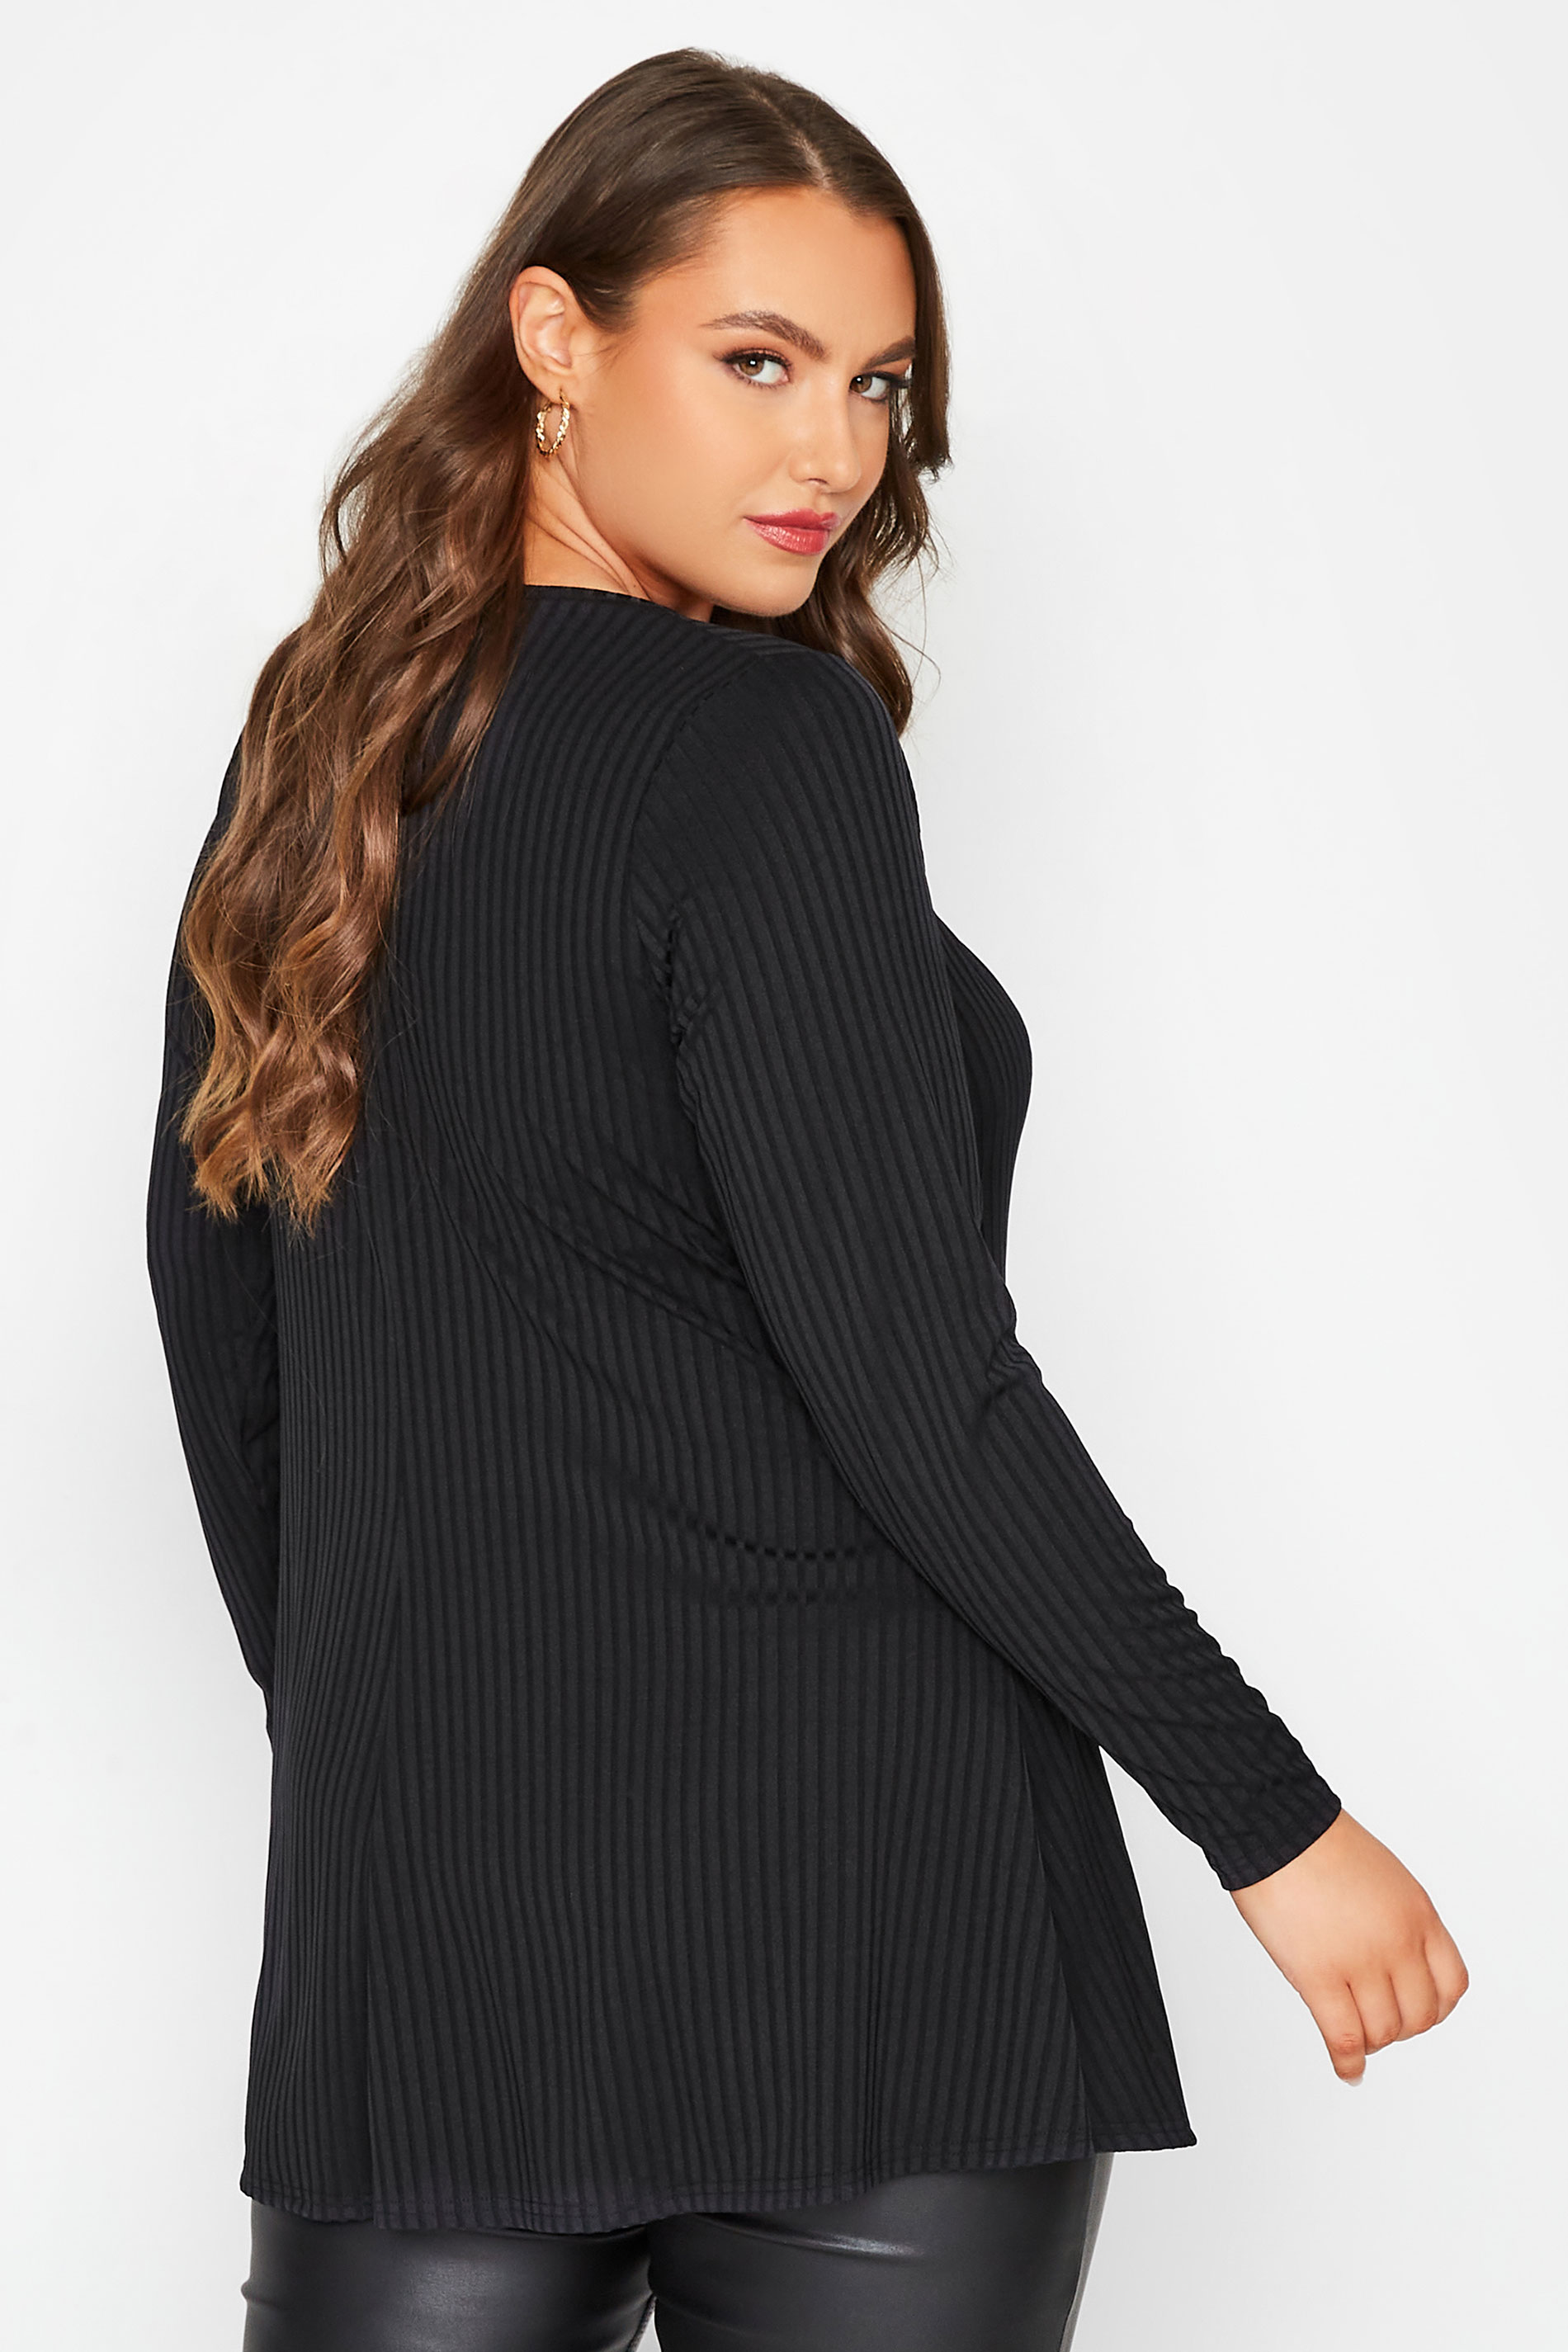 LIMITED COLLECTION Plus Size Black Ribbed Square Neck Top | Yours Clothing 3